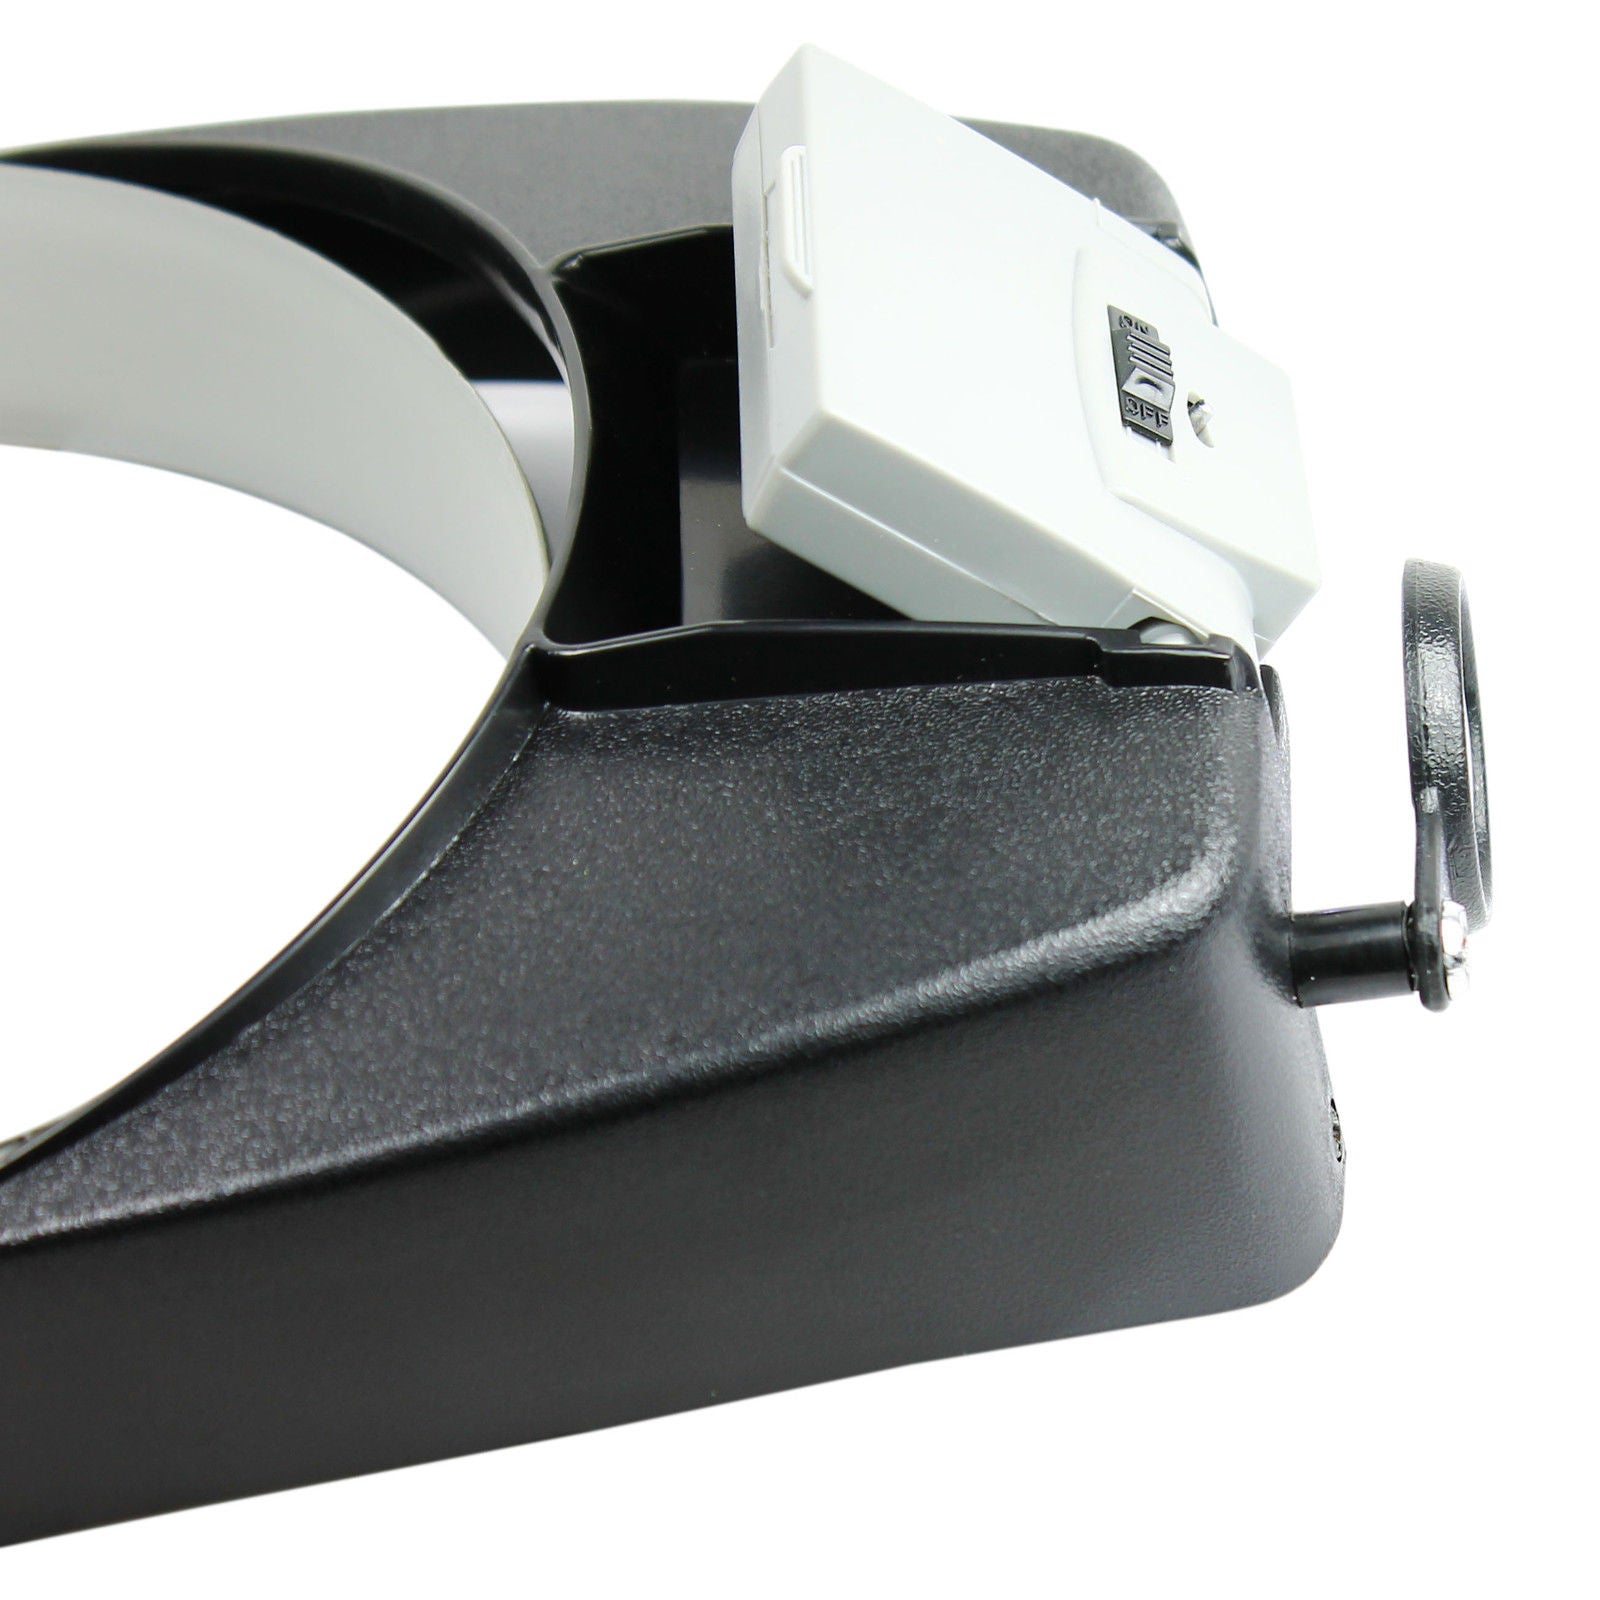 Magnifying Visor with Interchangeable Lenses